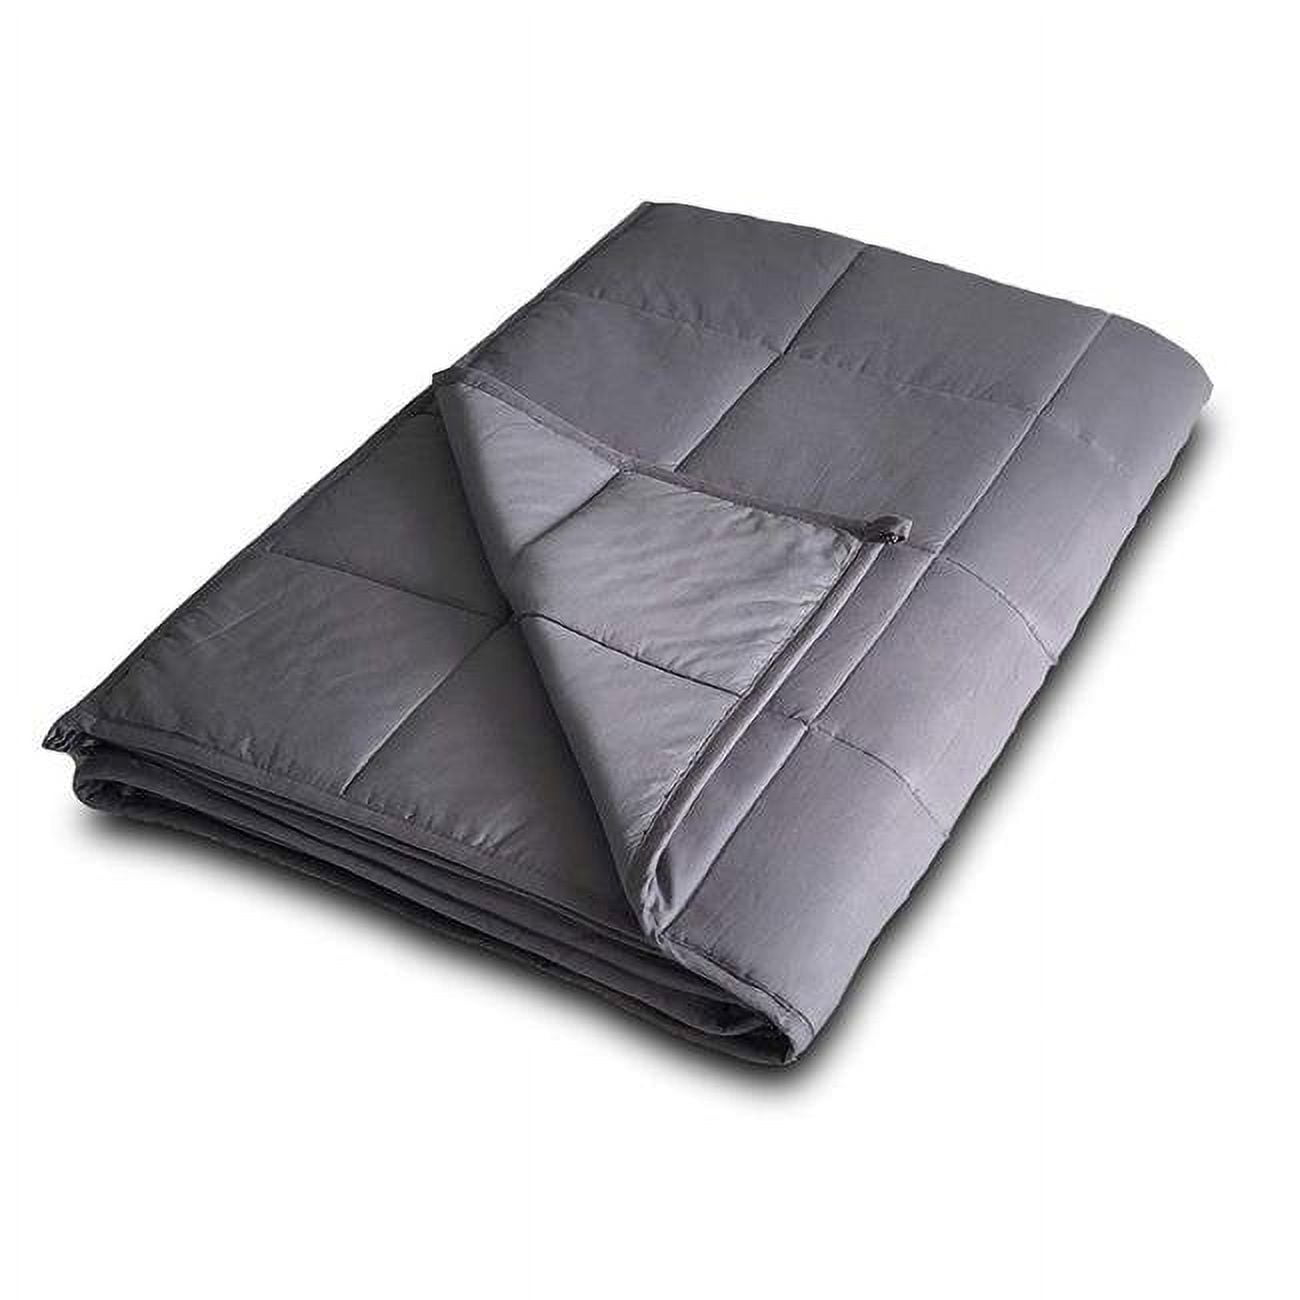 Dcwb4872-15-ws 48 X 72 In. 15 Lbs Weighted Blanket - Gray